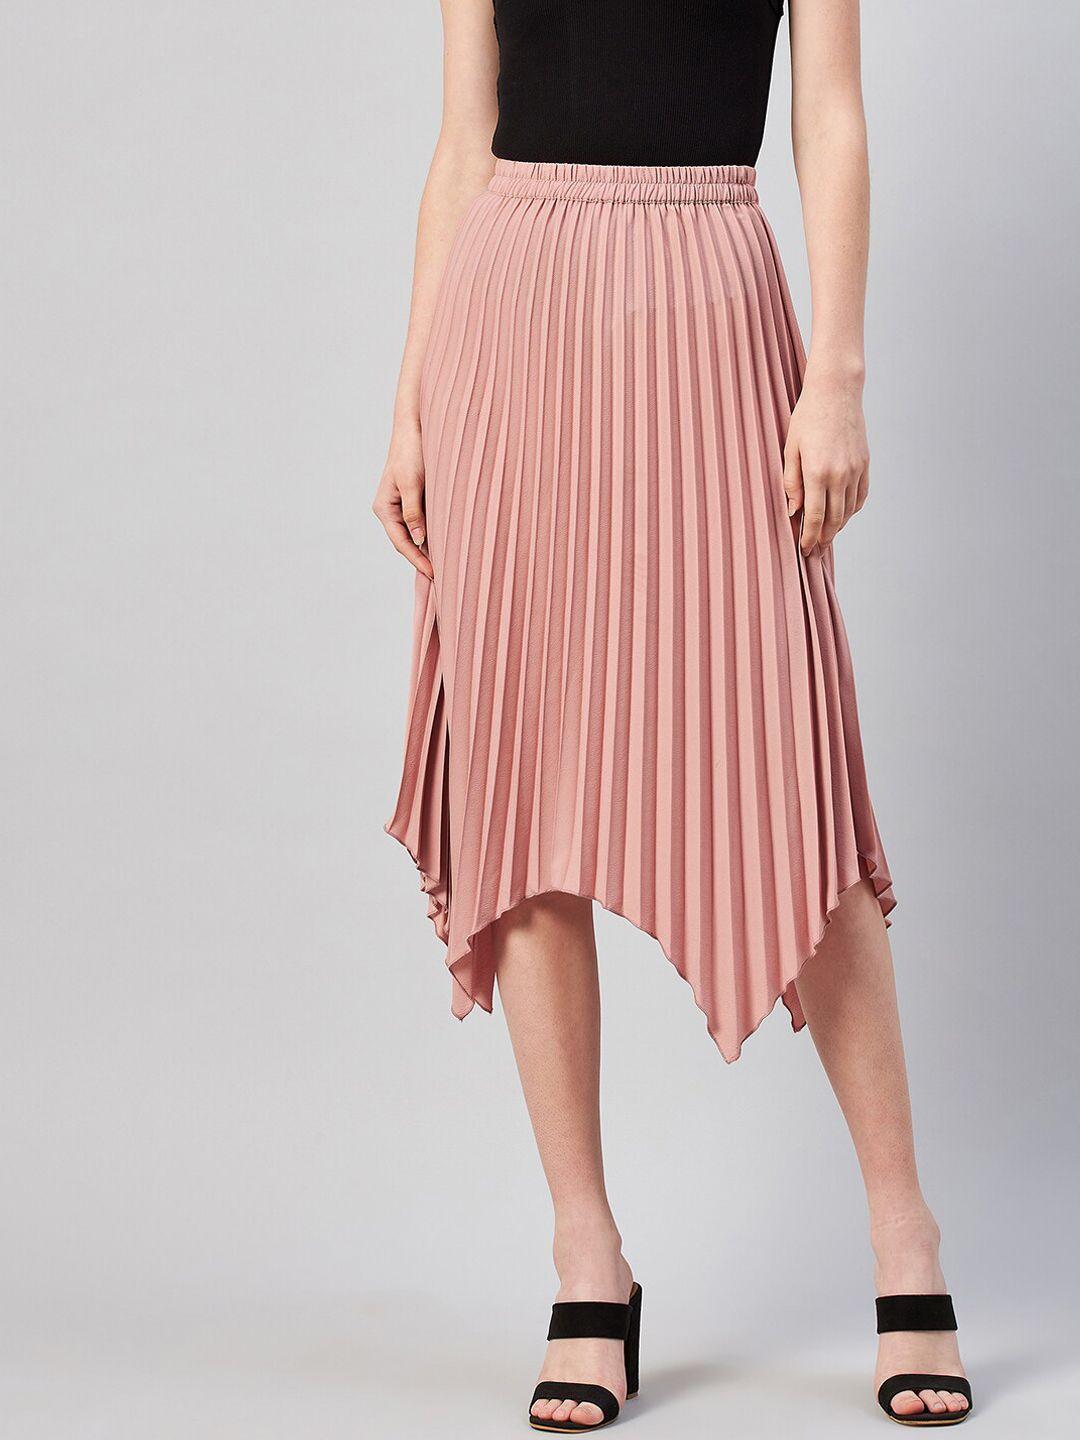 marie claire women peach-coloured solid a-line pleated skirt